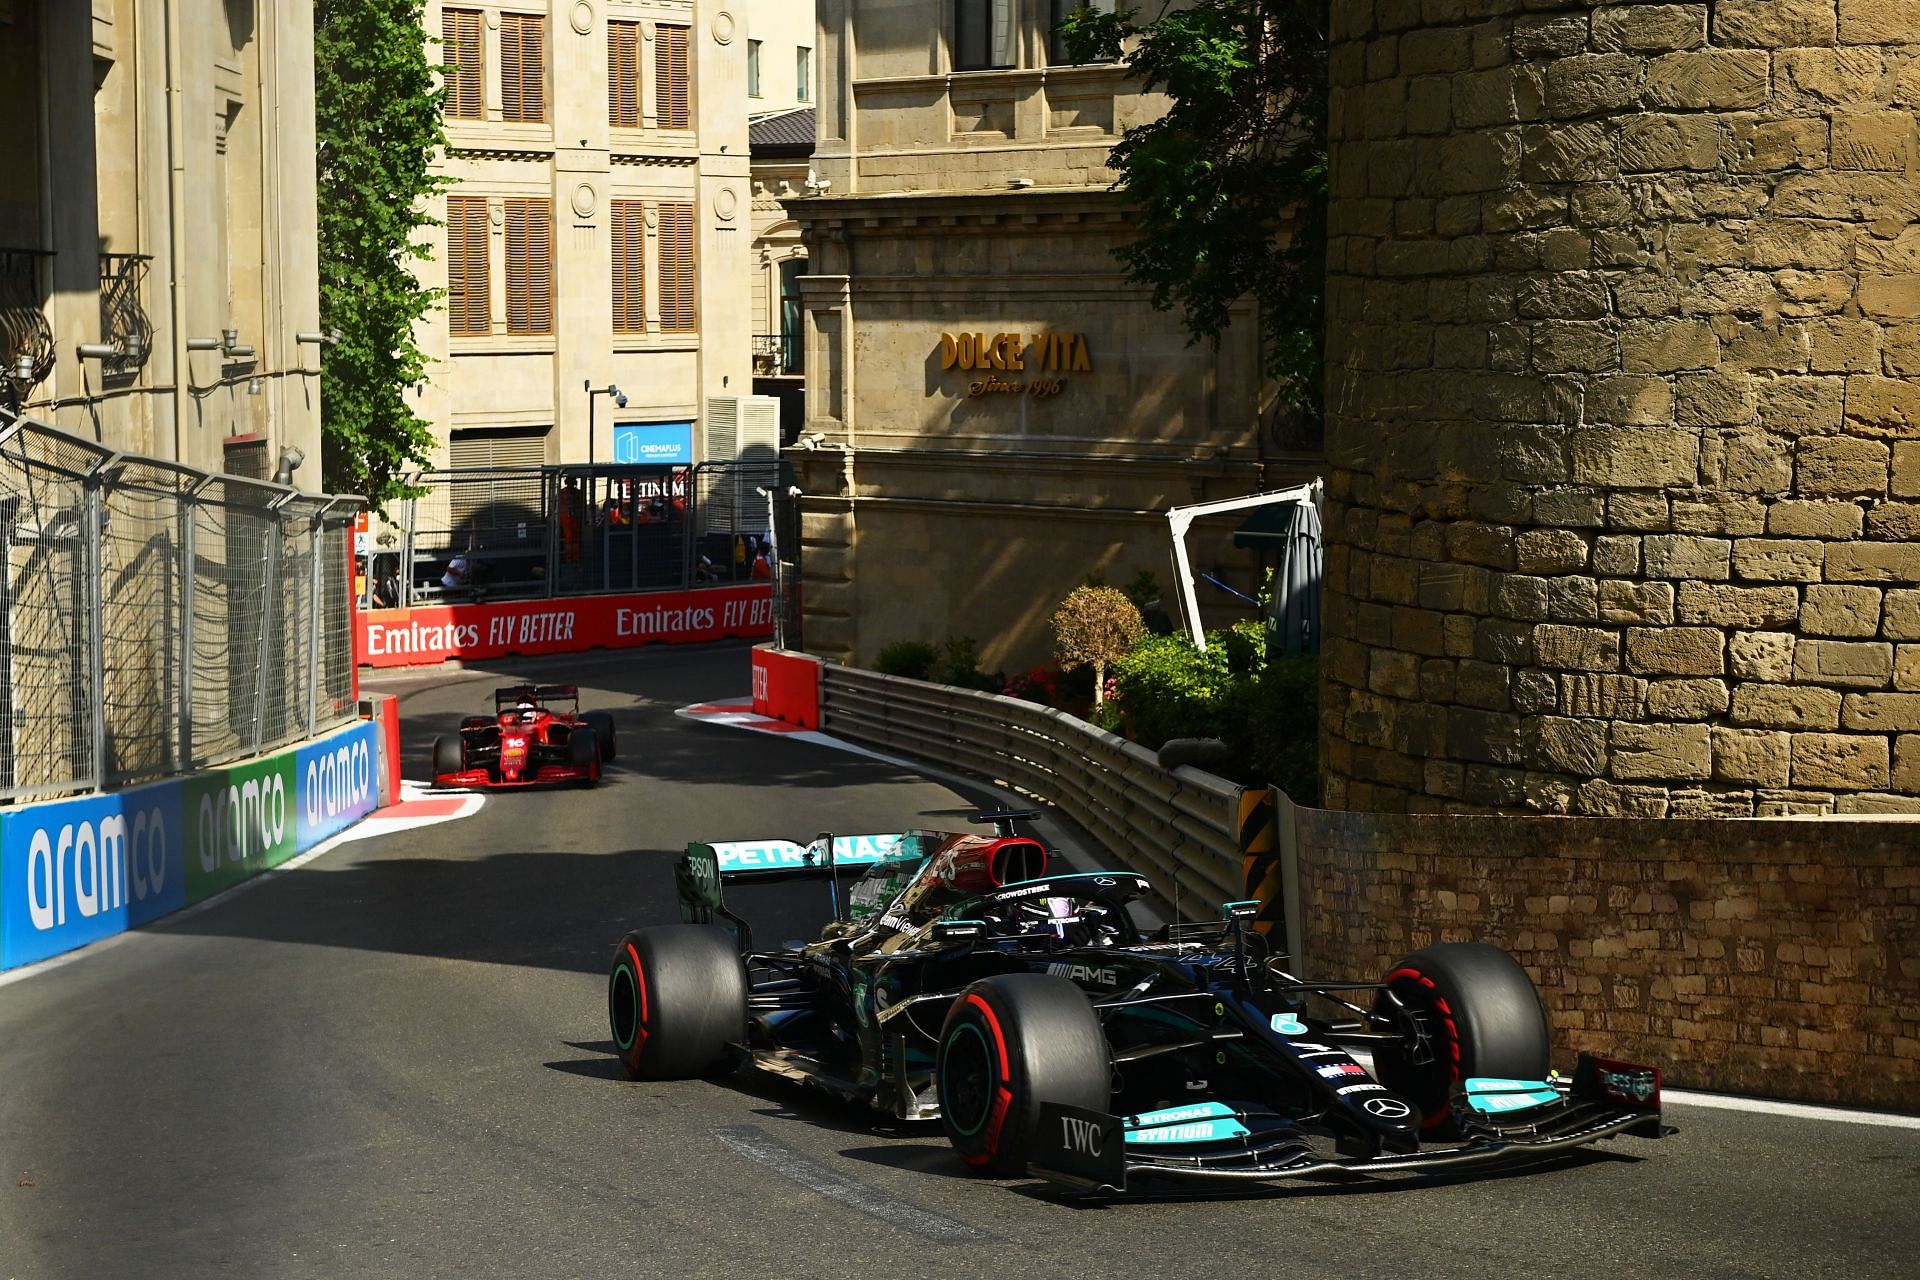 Cars zoom past the castle section of Baku Street circuit in 2021